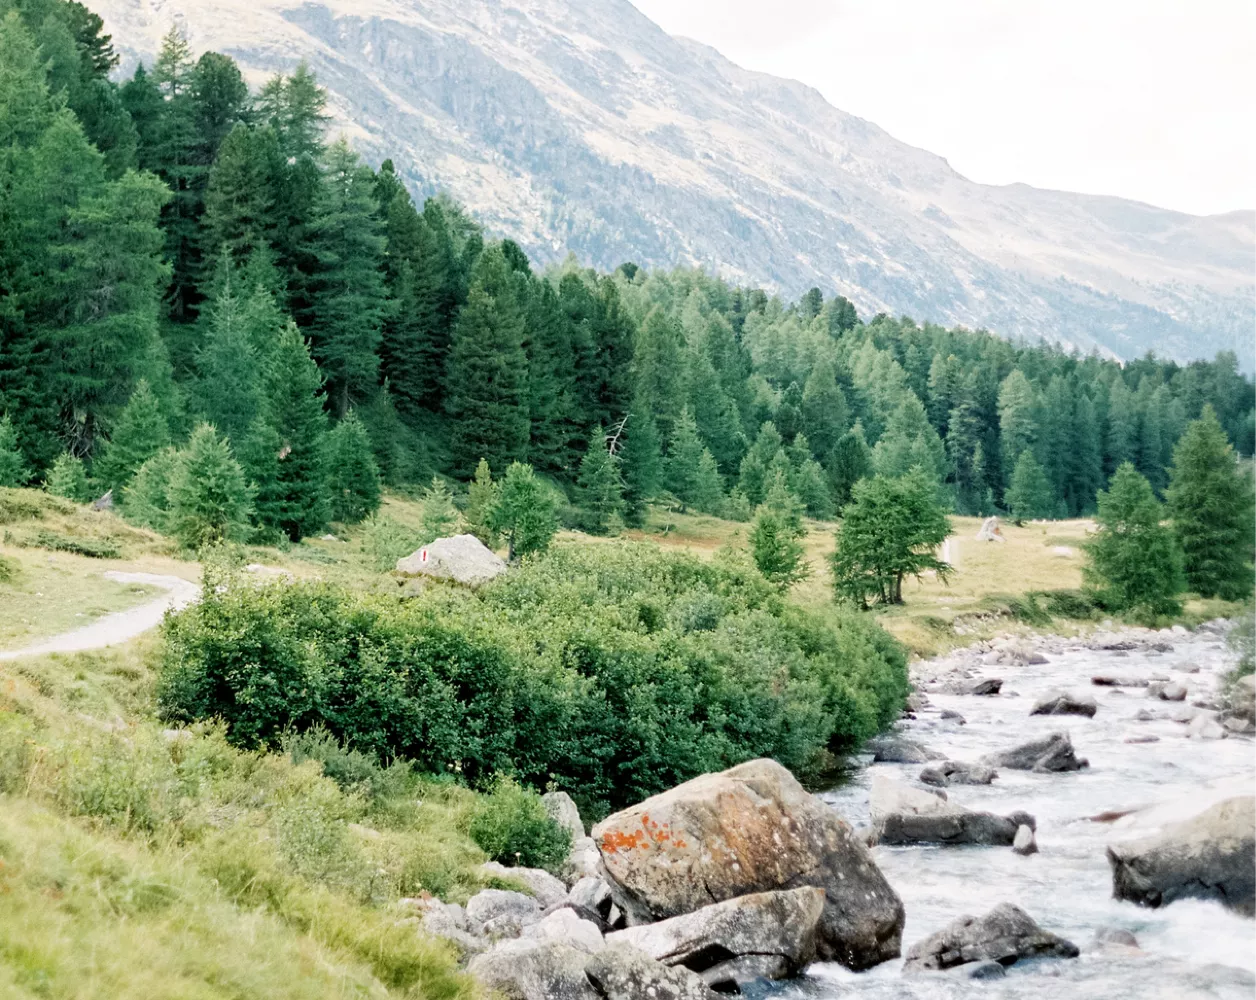 Picture of a hiking trail next to a river with evergreen trees and a mountain in the background